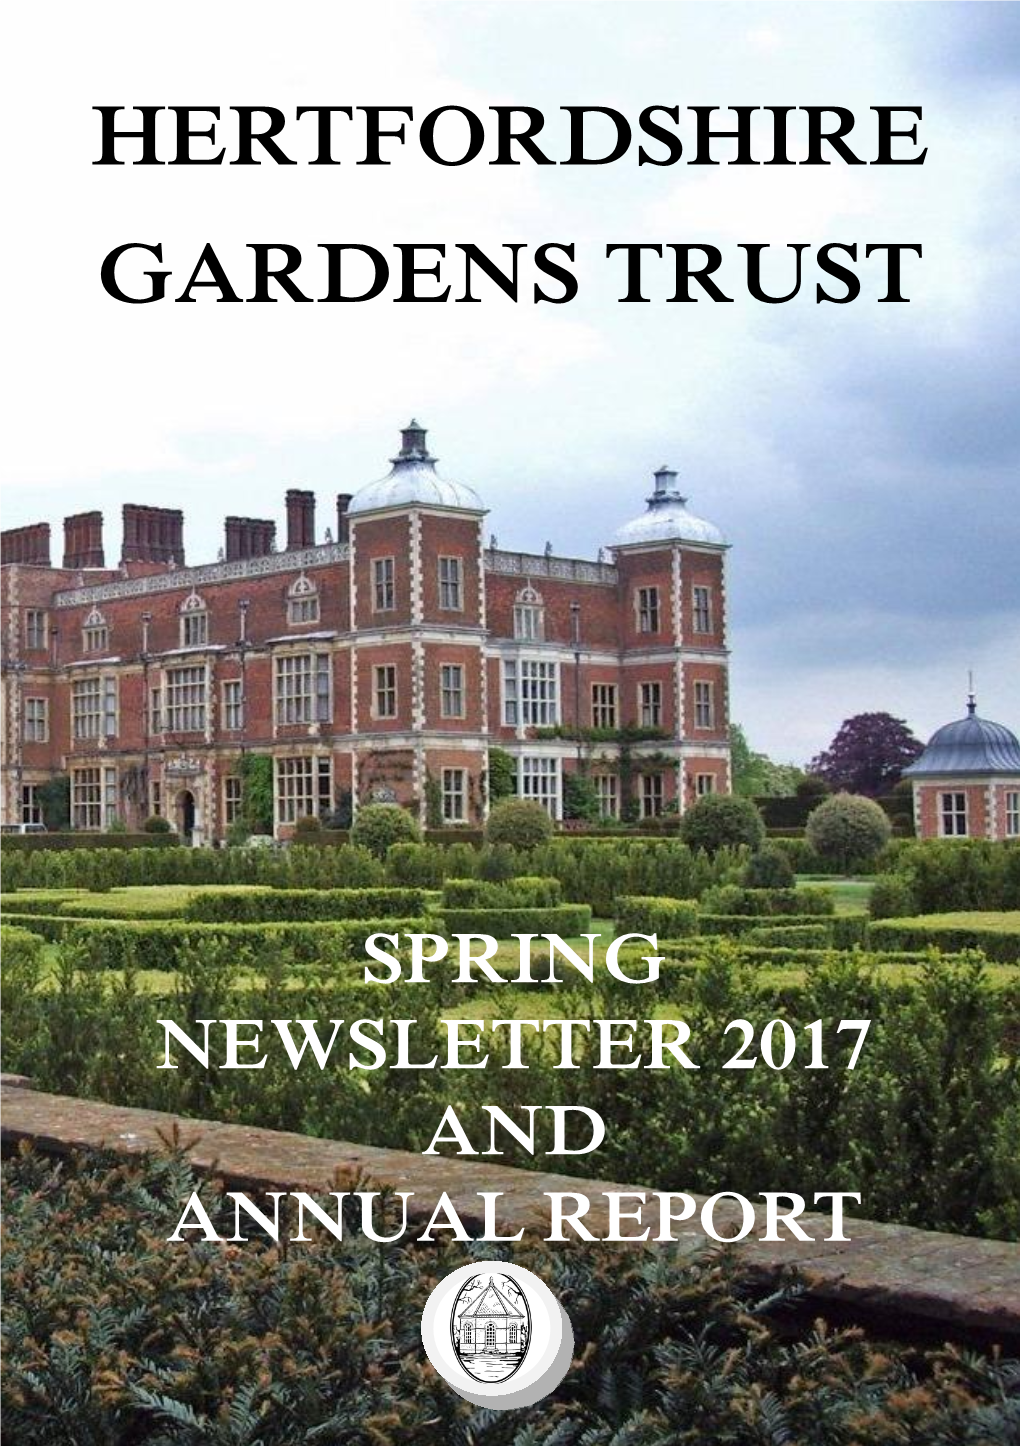 Spring Newsletter 2017 and Annual Report